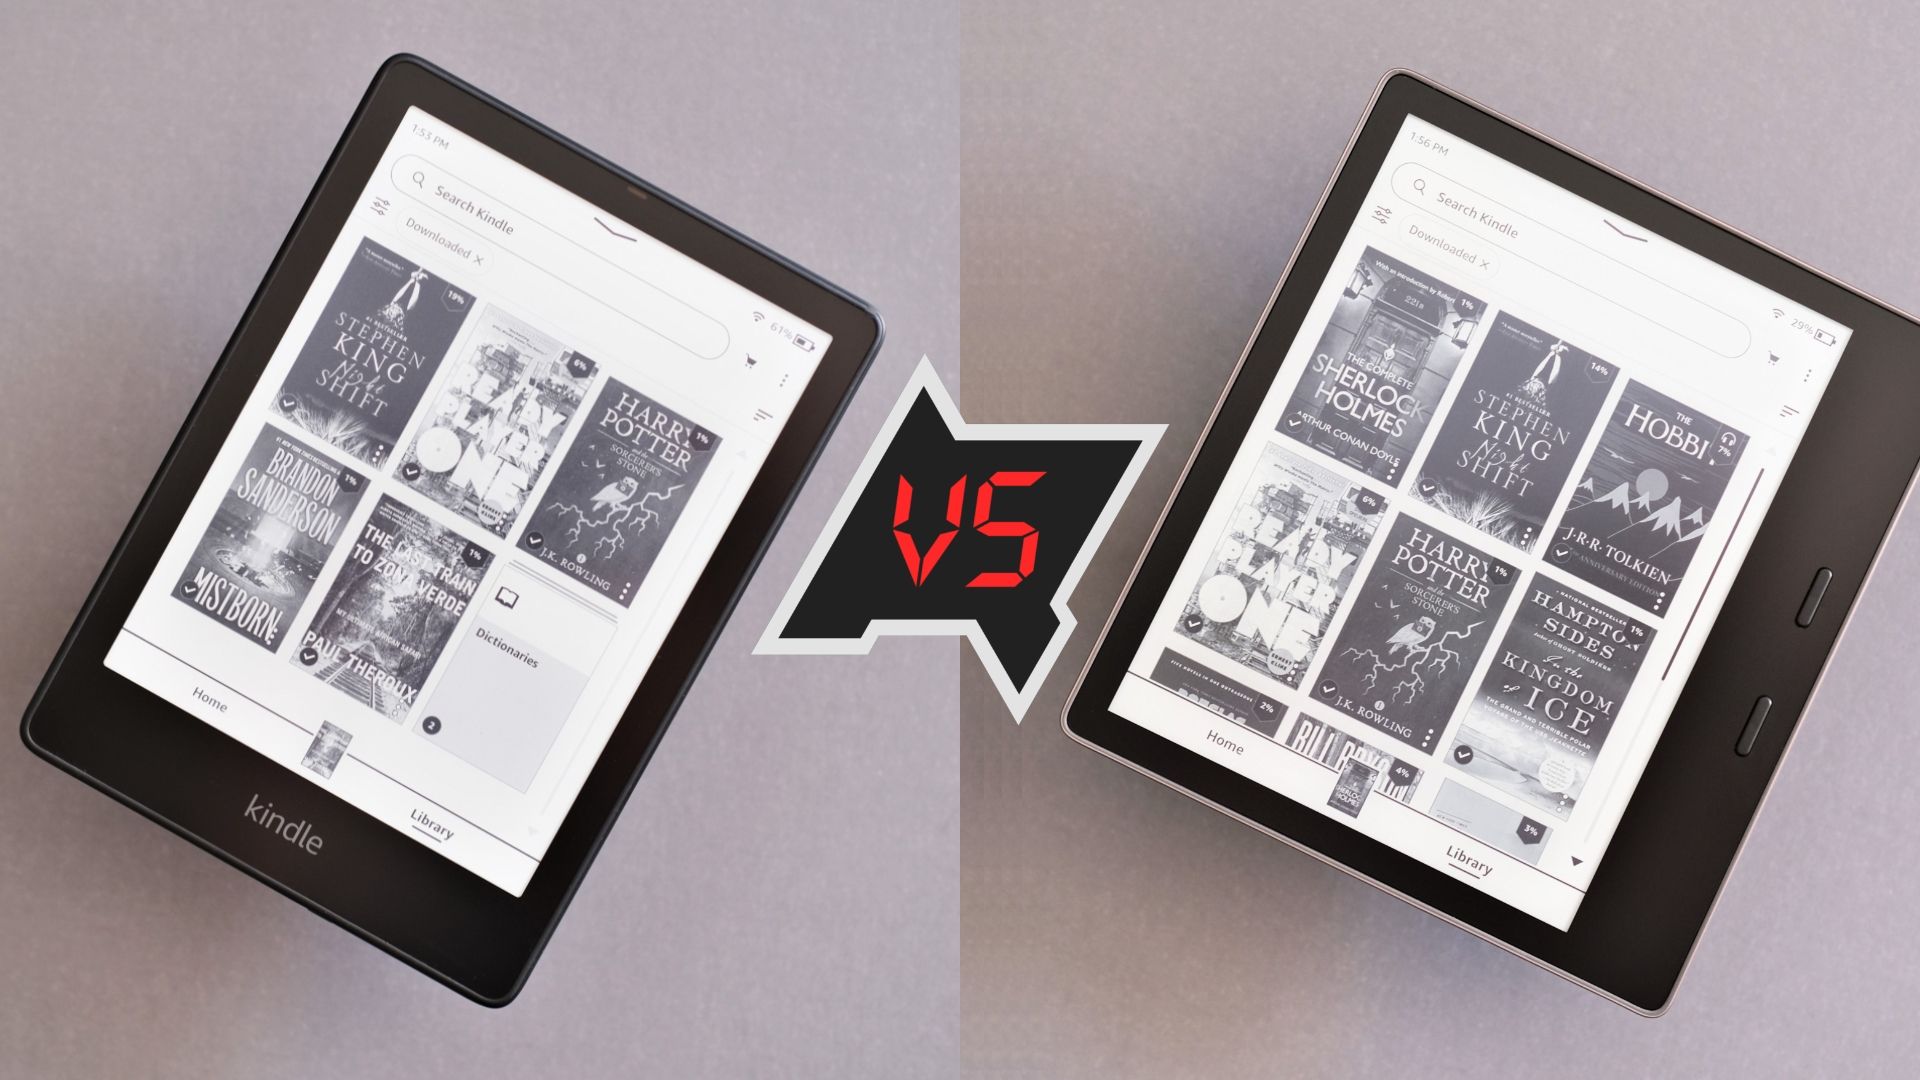 Kindle Paperwhite (on the left) vs Kindle Oasis (on the right)